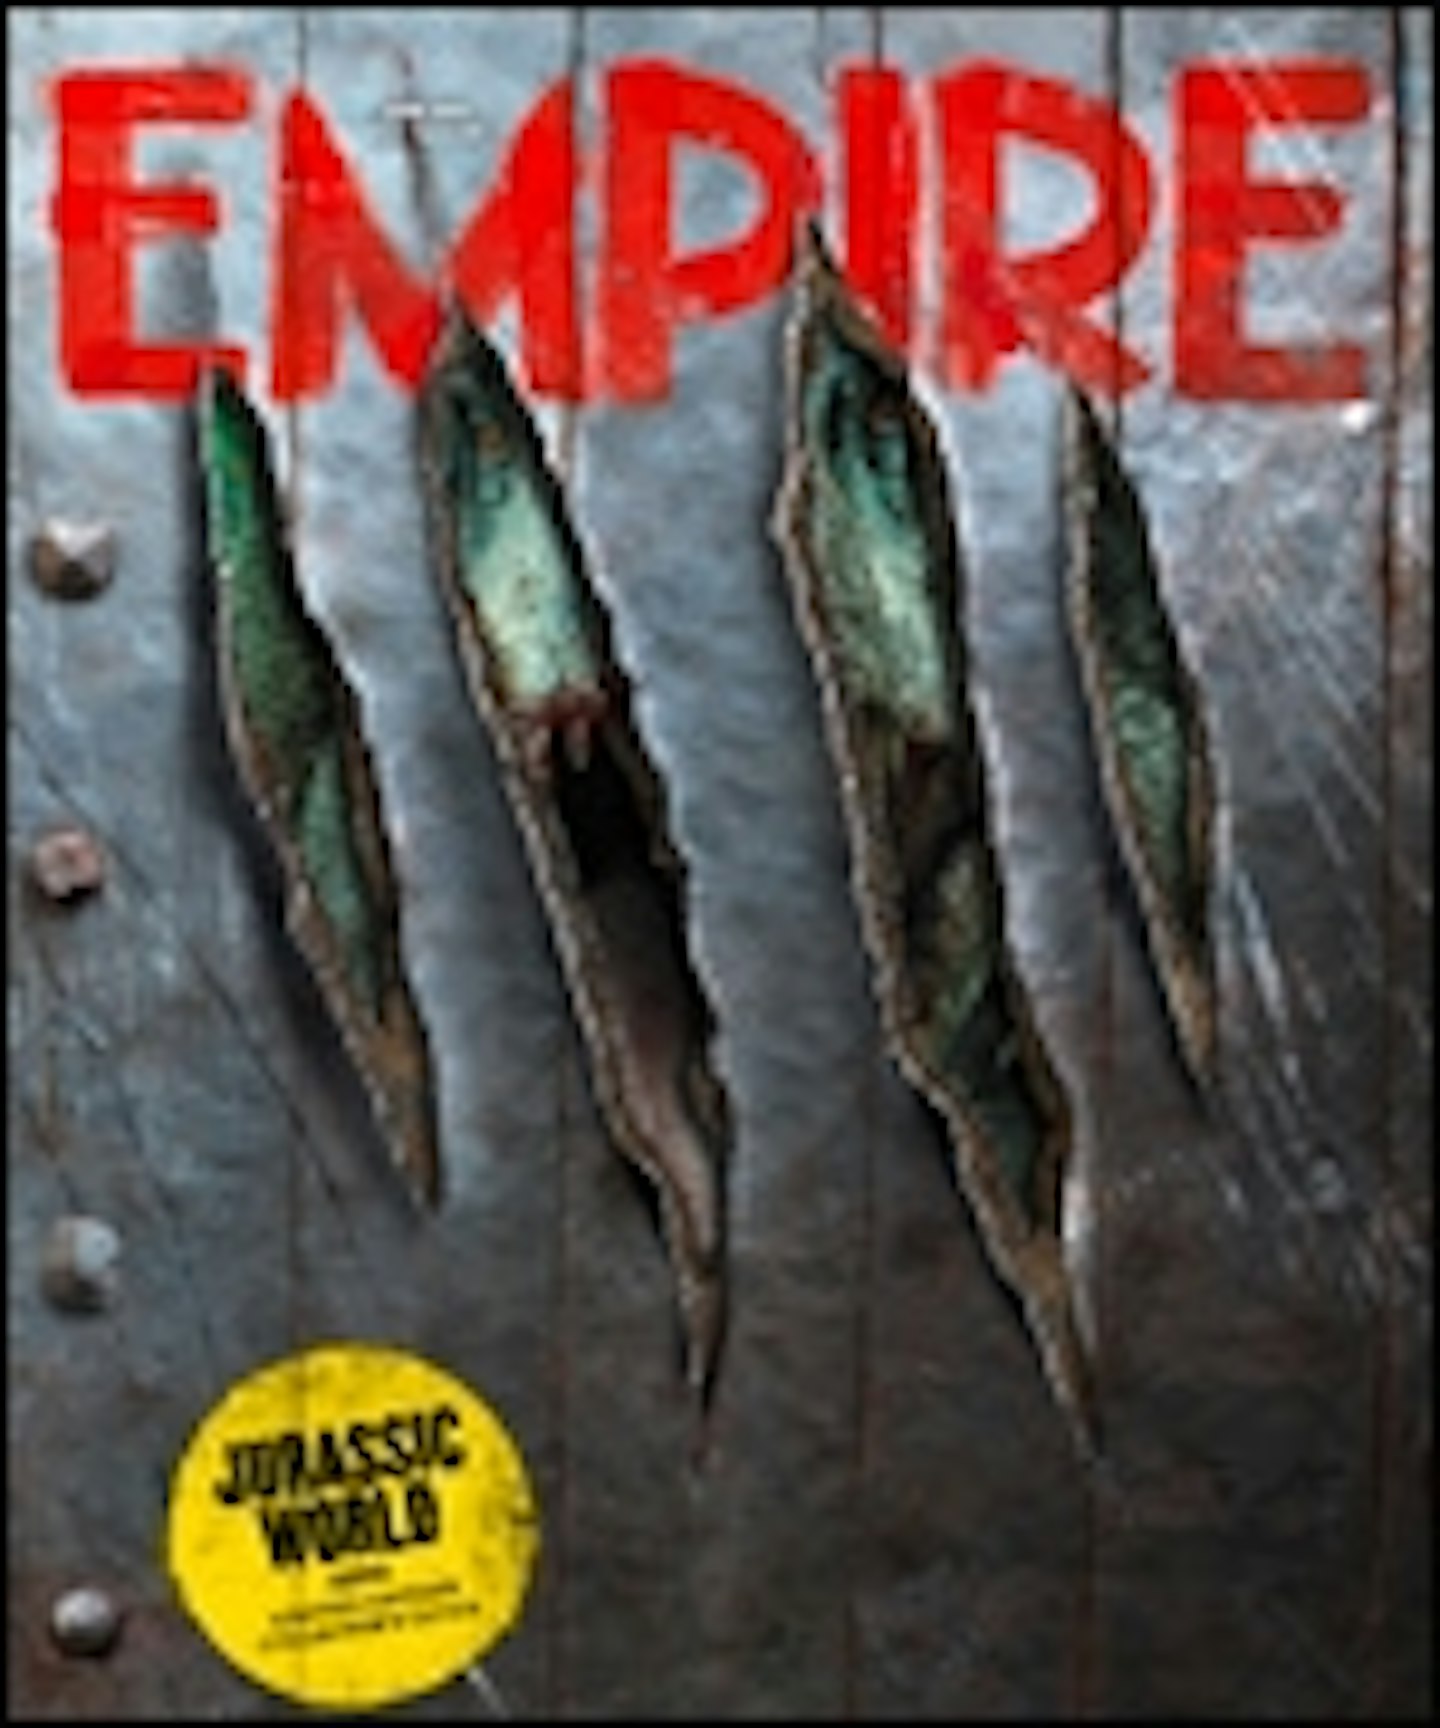 Empire's Jurassic World Covers Unveiled